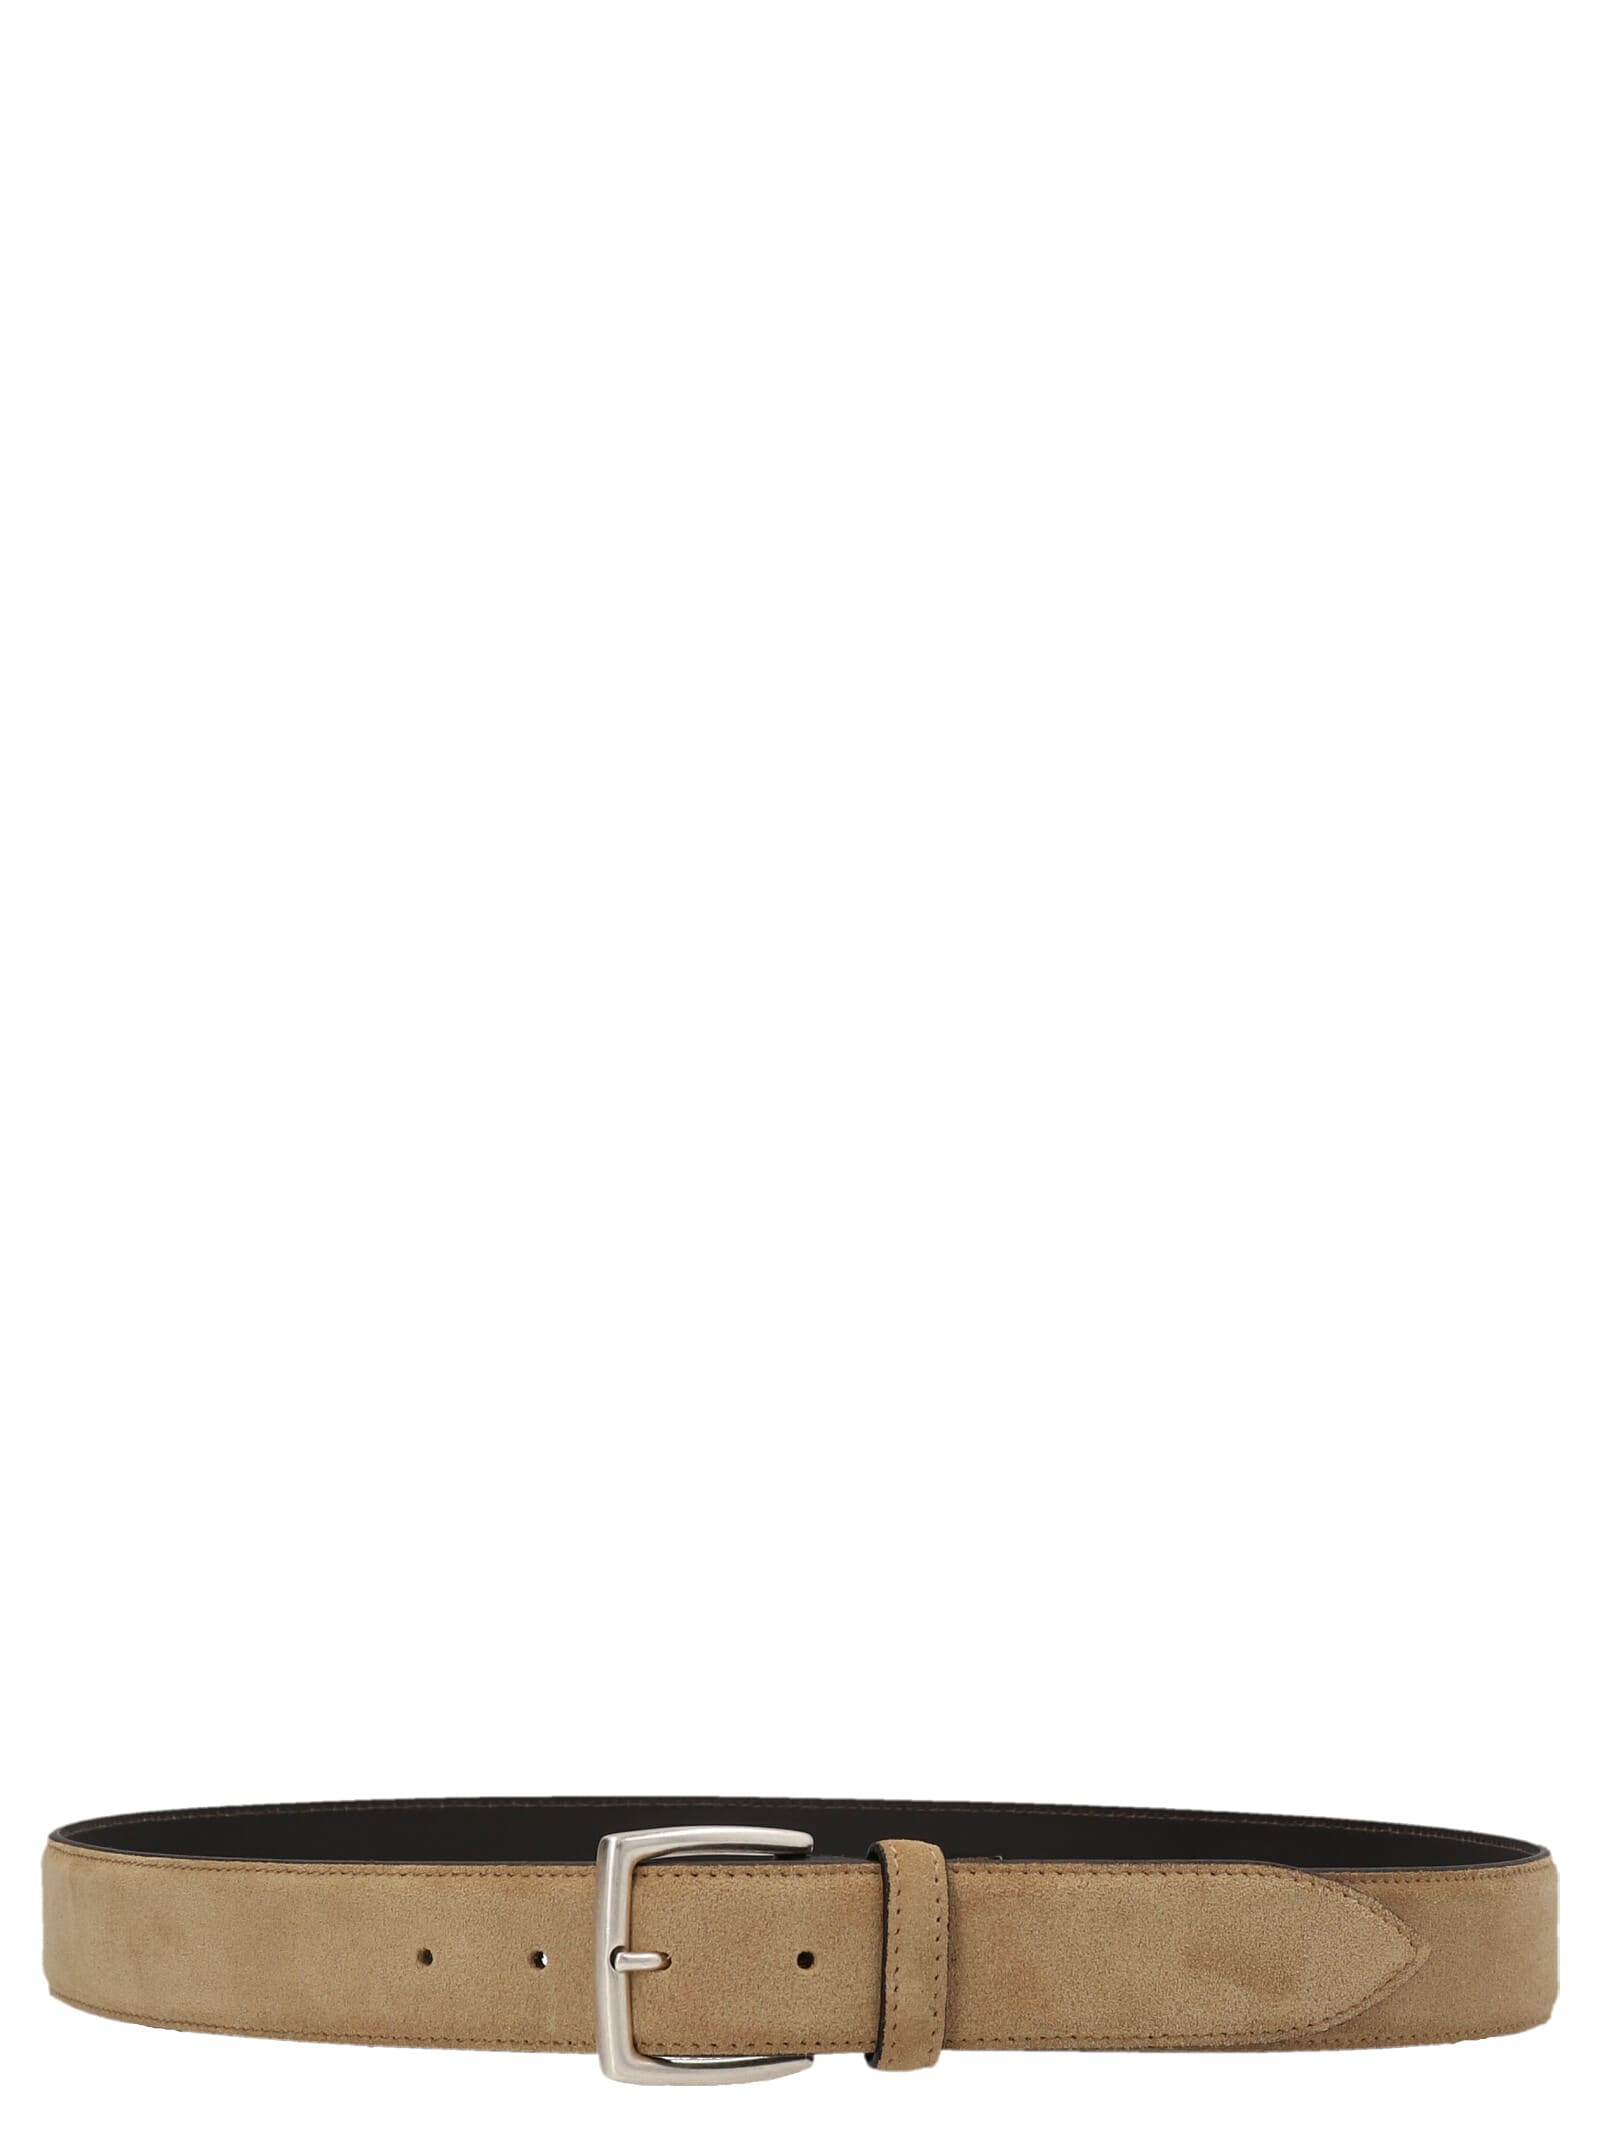 D'Amico Suede Belt